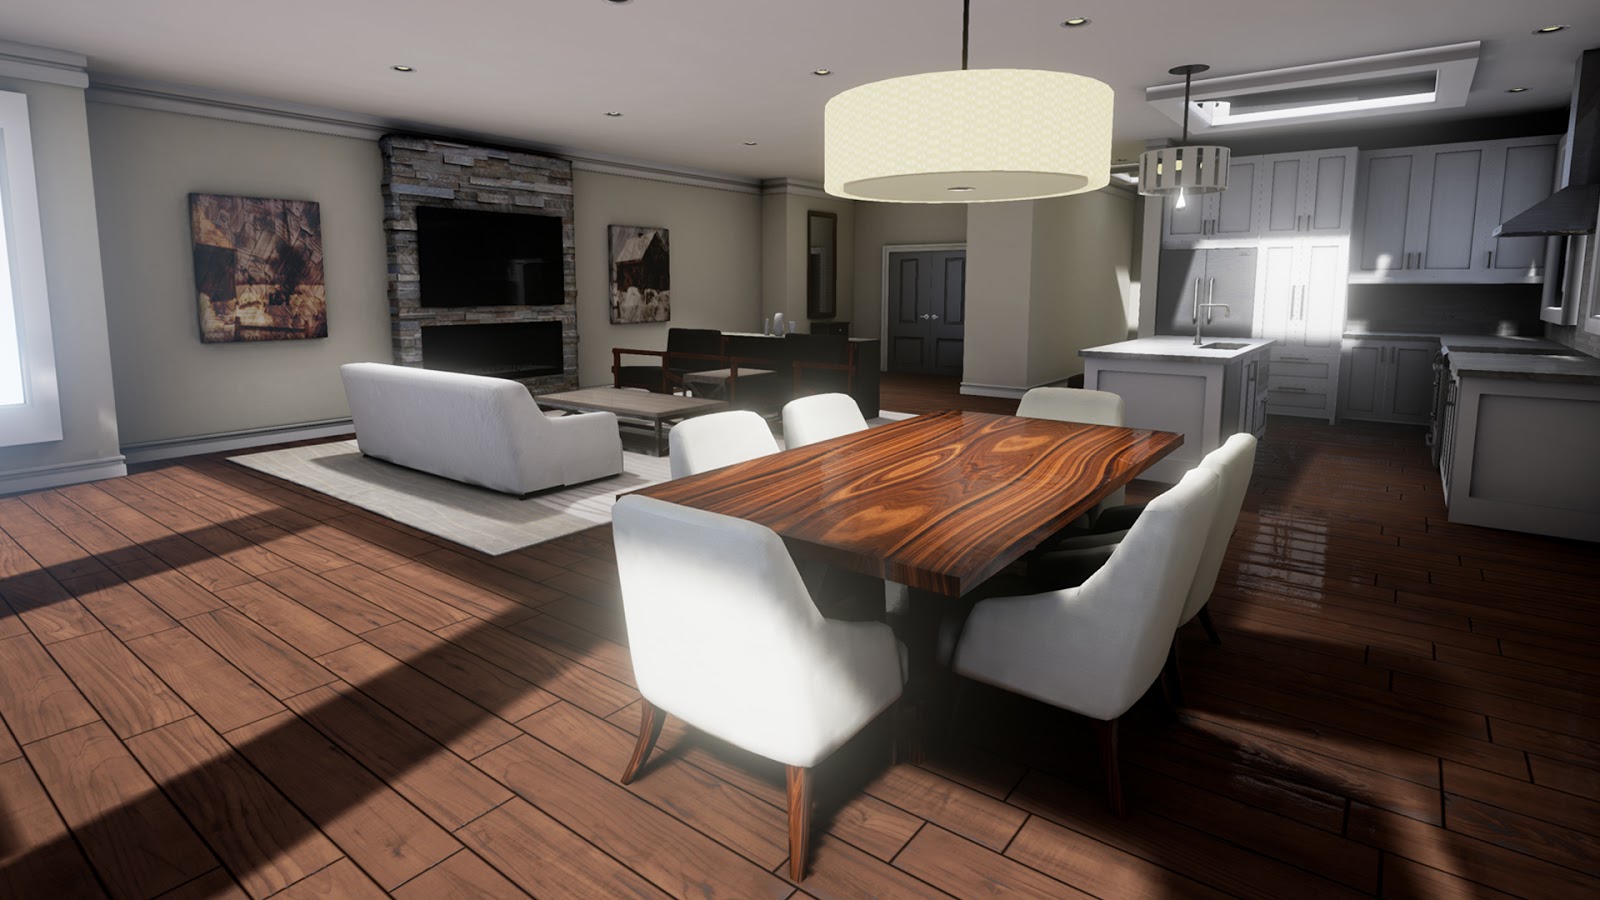 free download archicad furniture